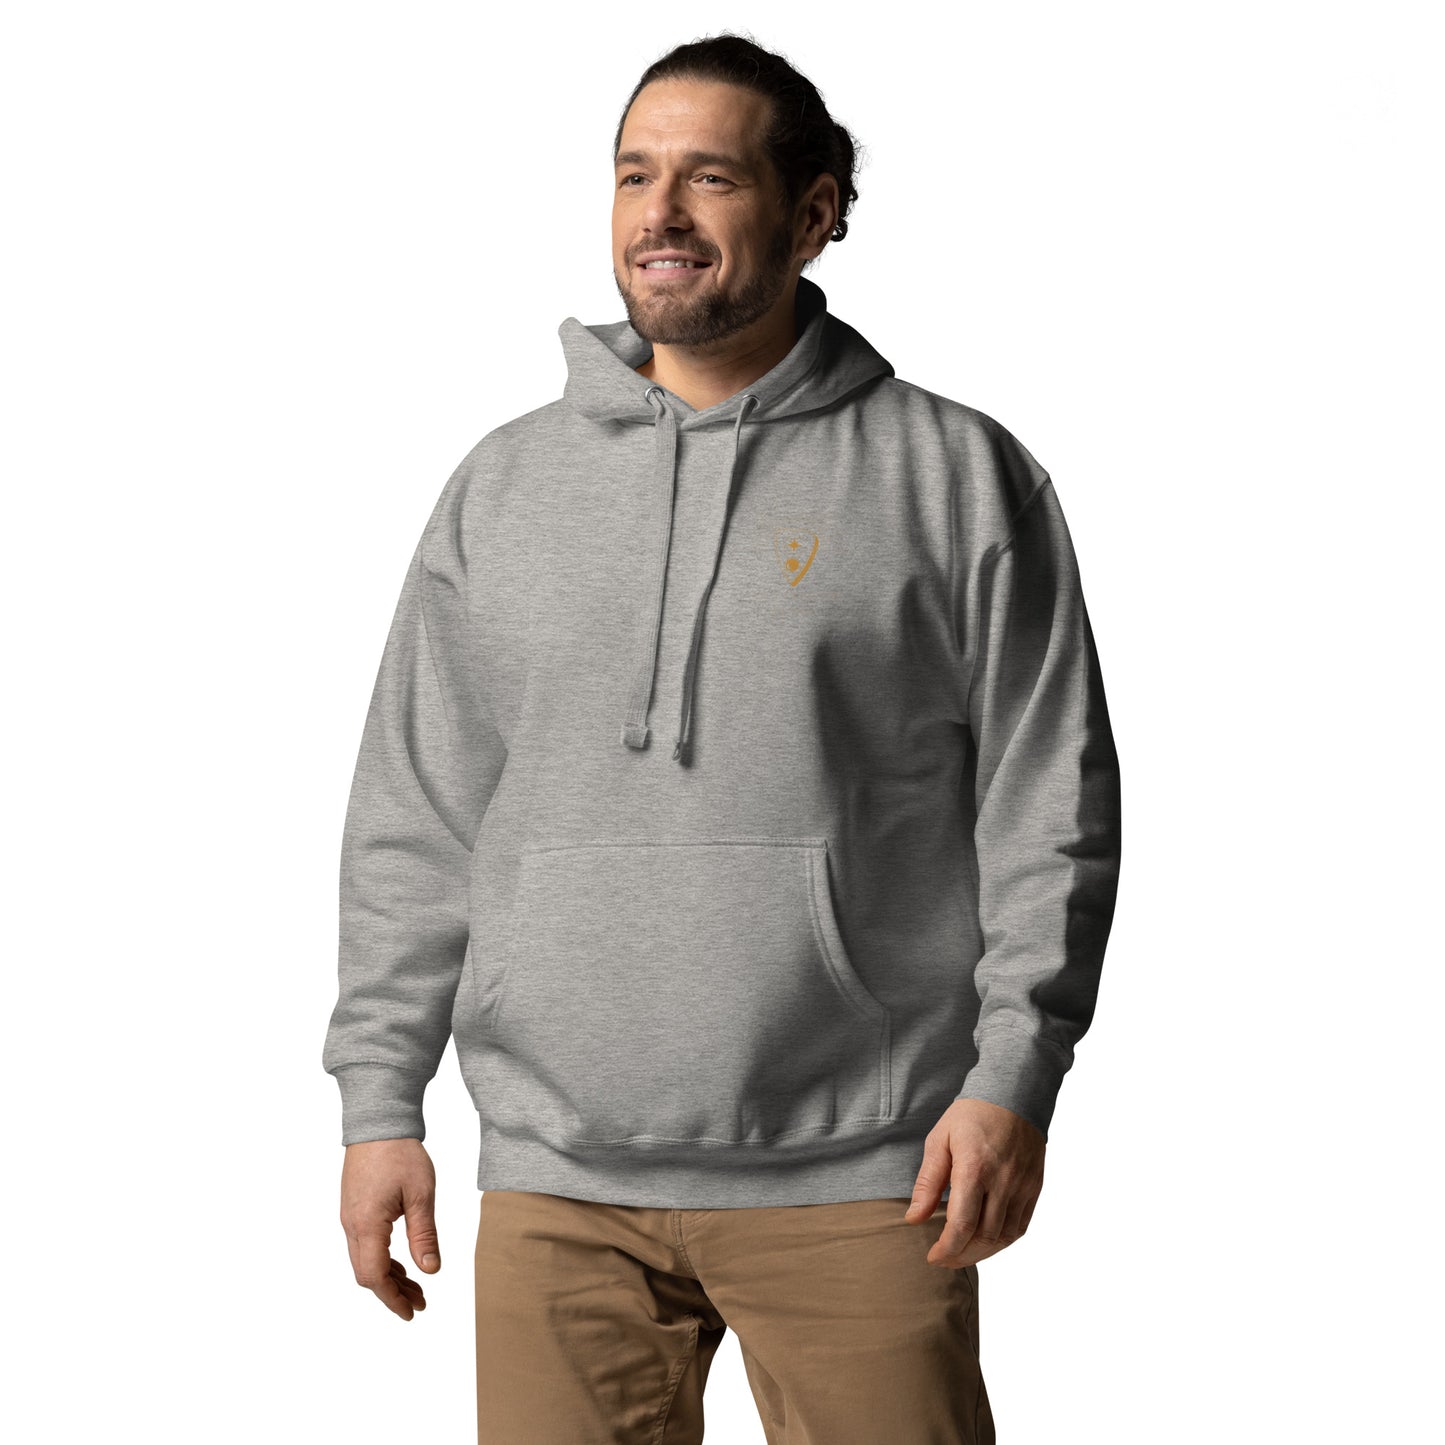 Only fear the living Unisex Hoodie